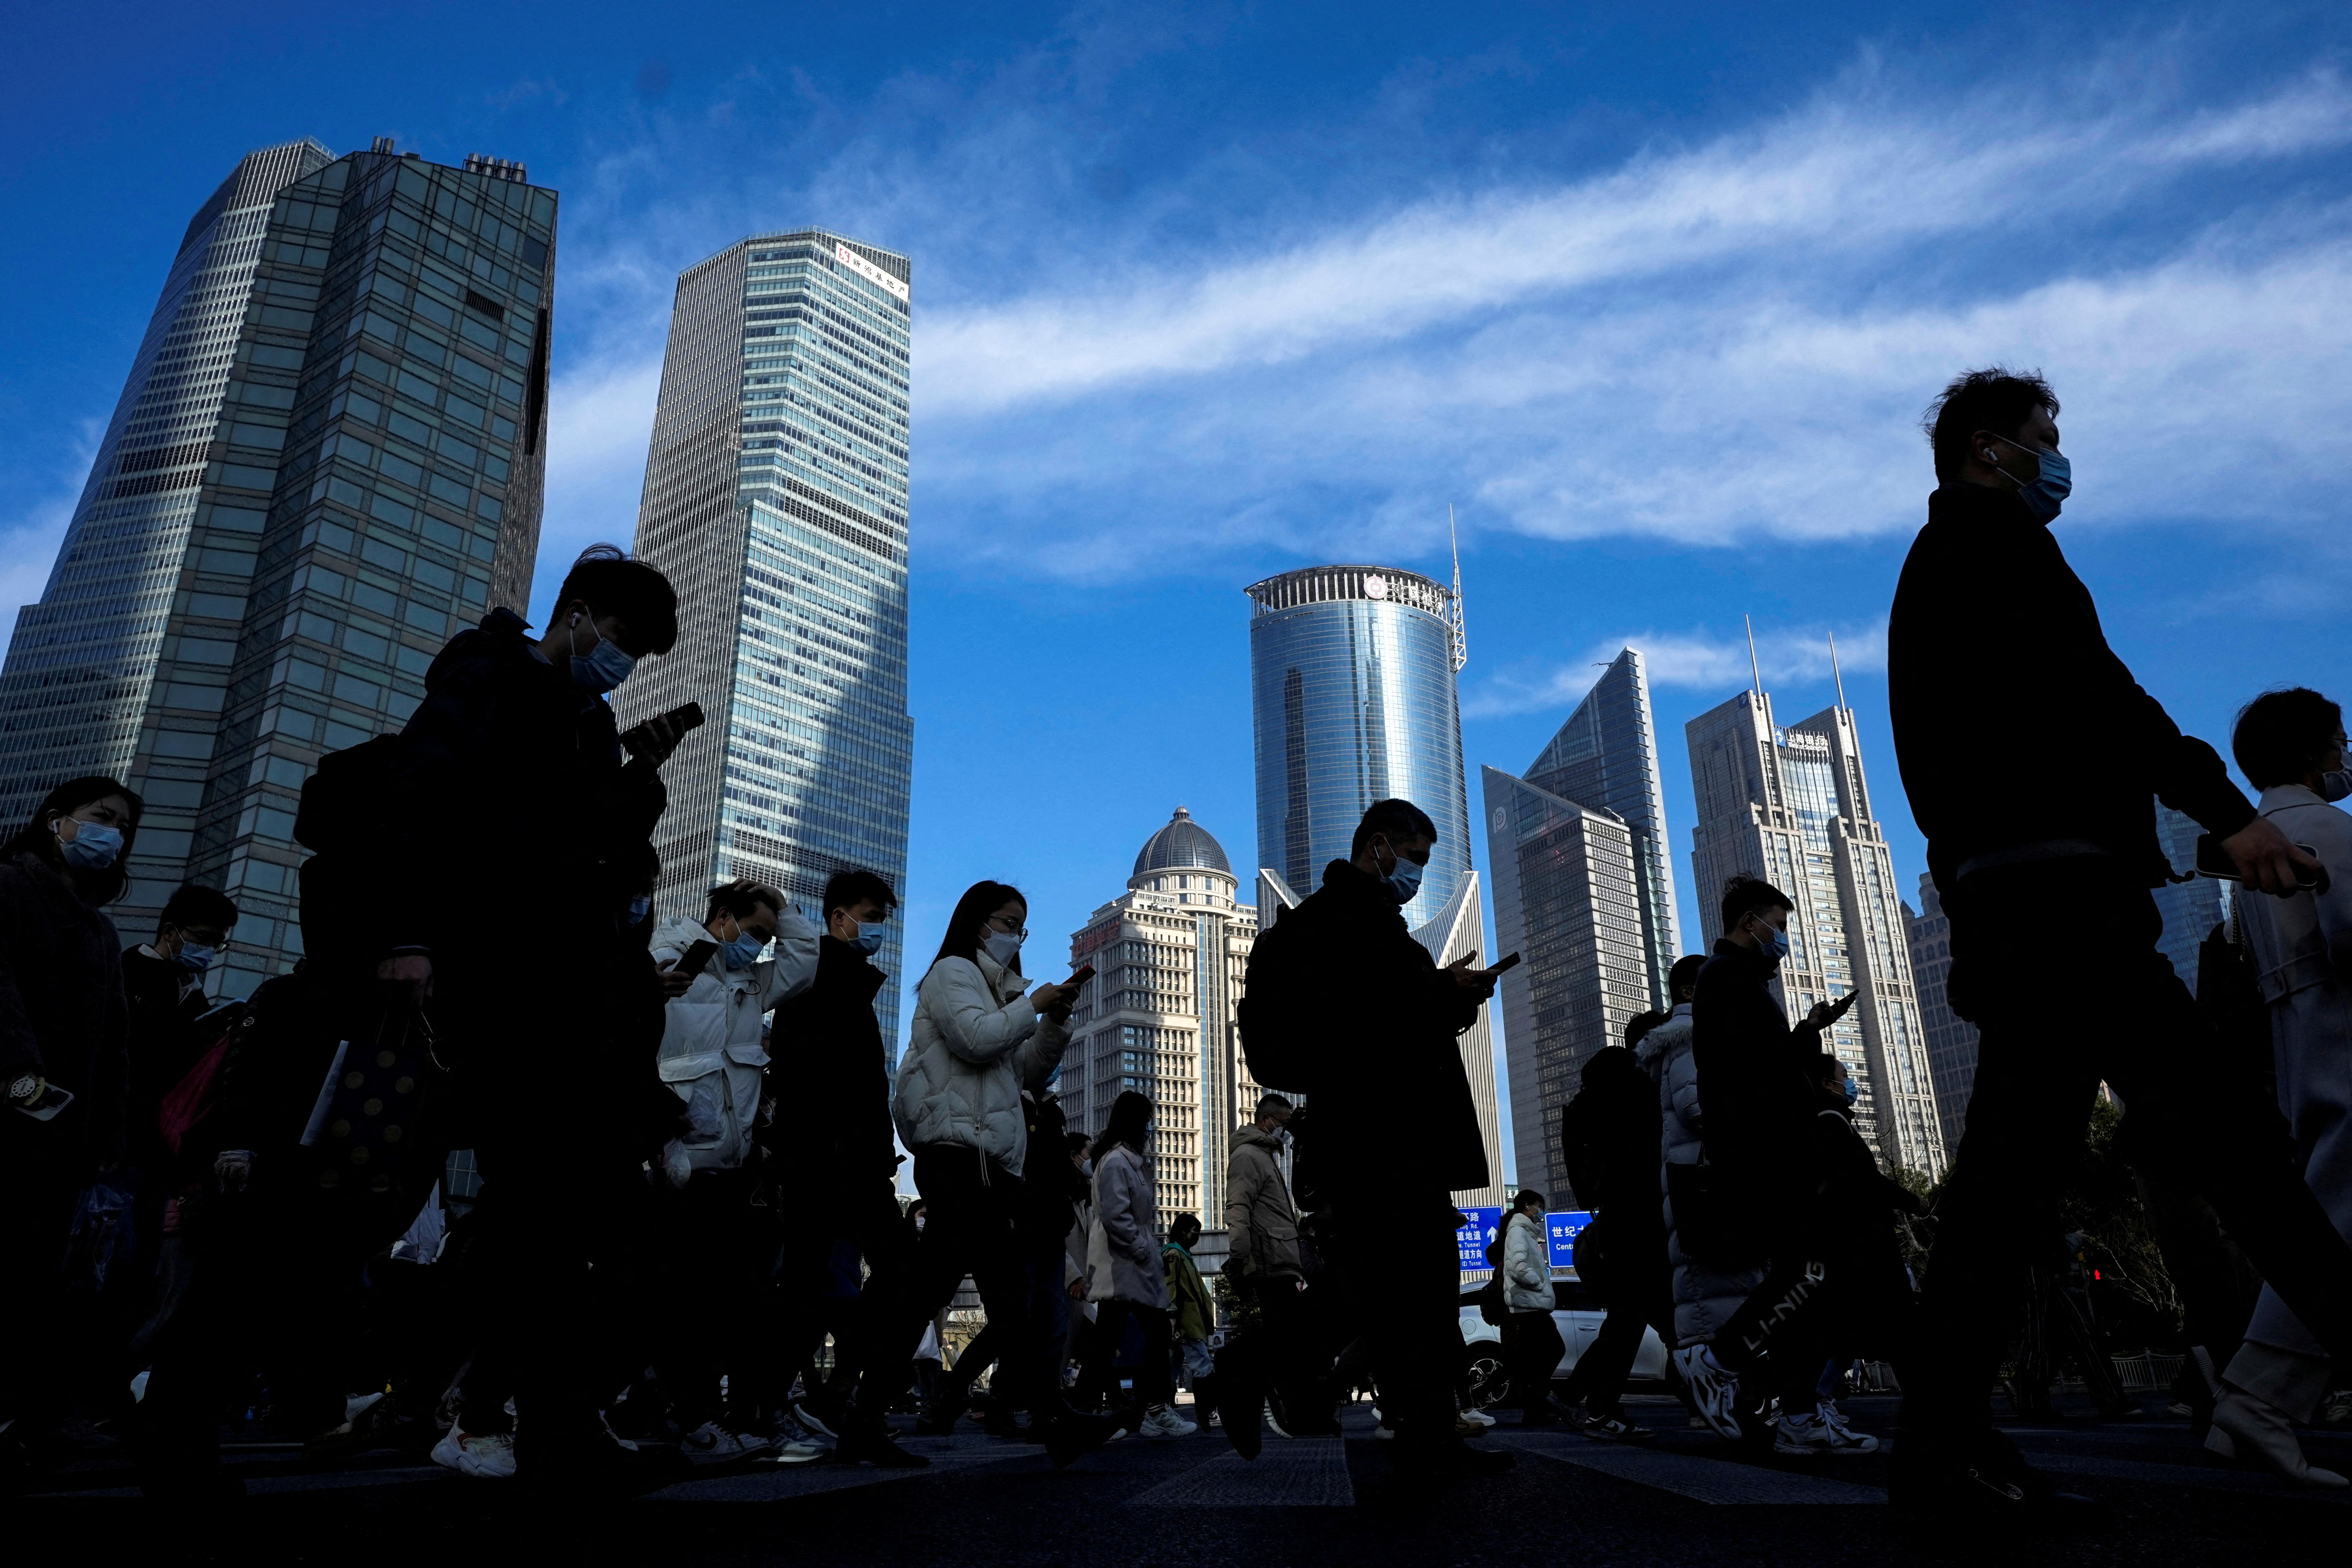 People cross a street near office towers in the Lujiazui financial district in Shanghai